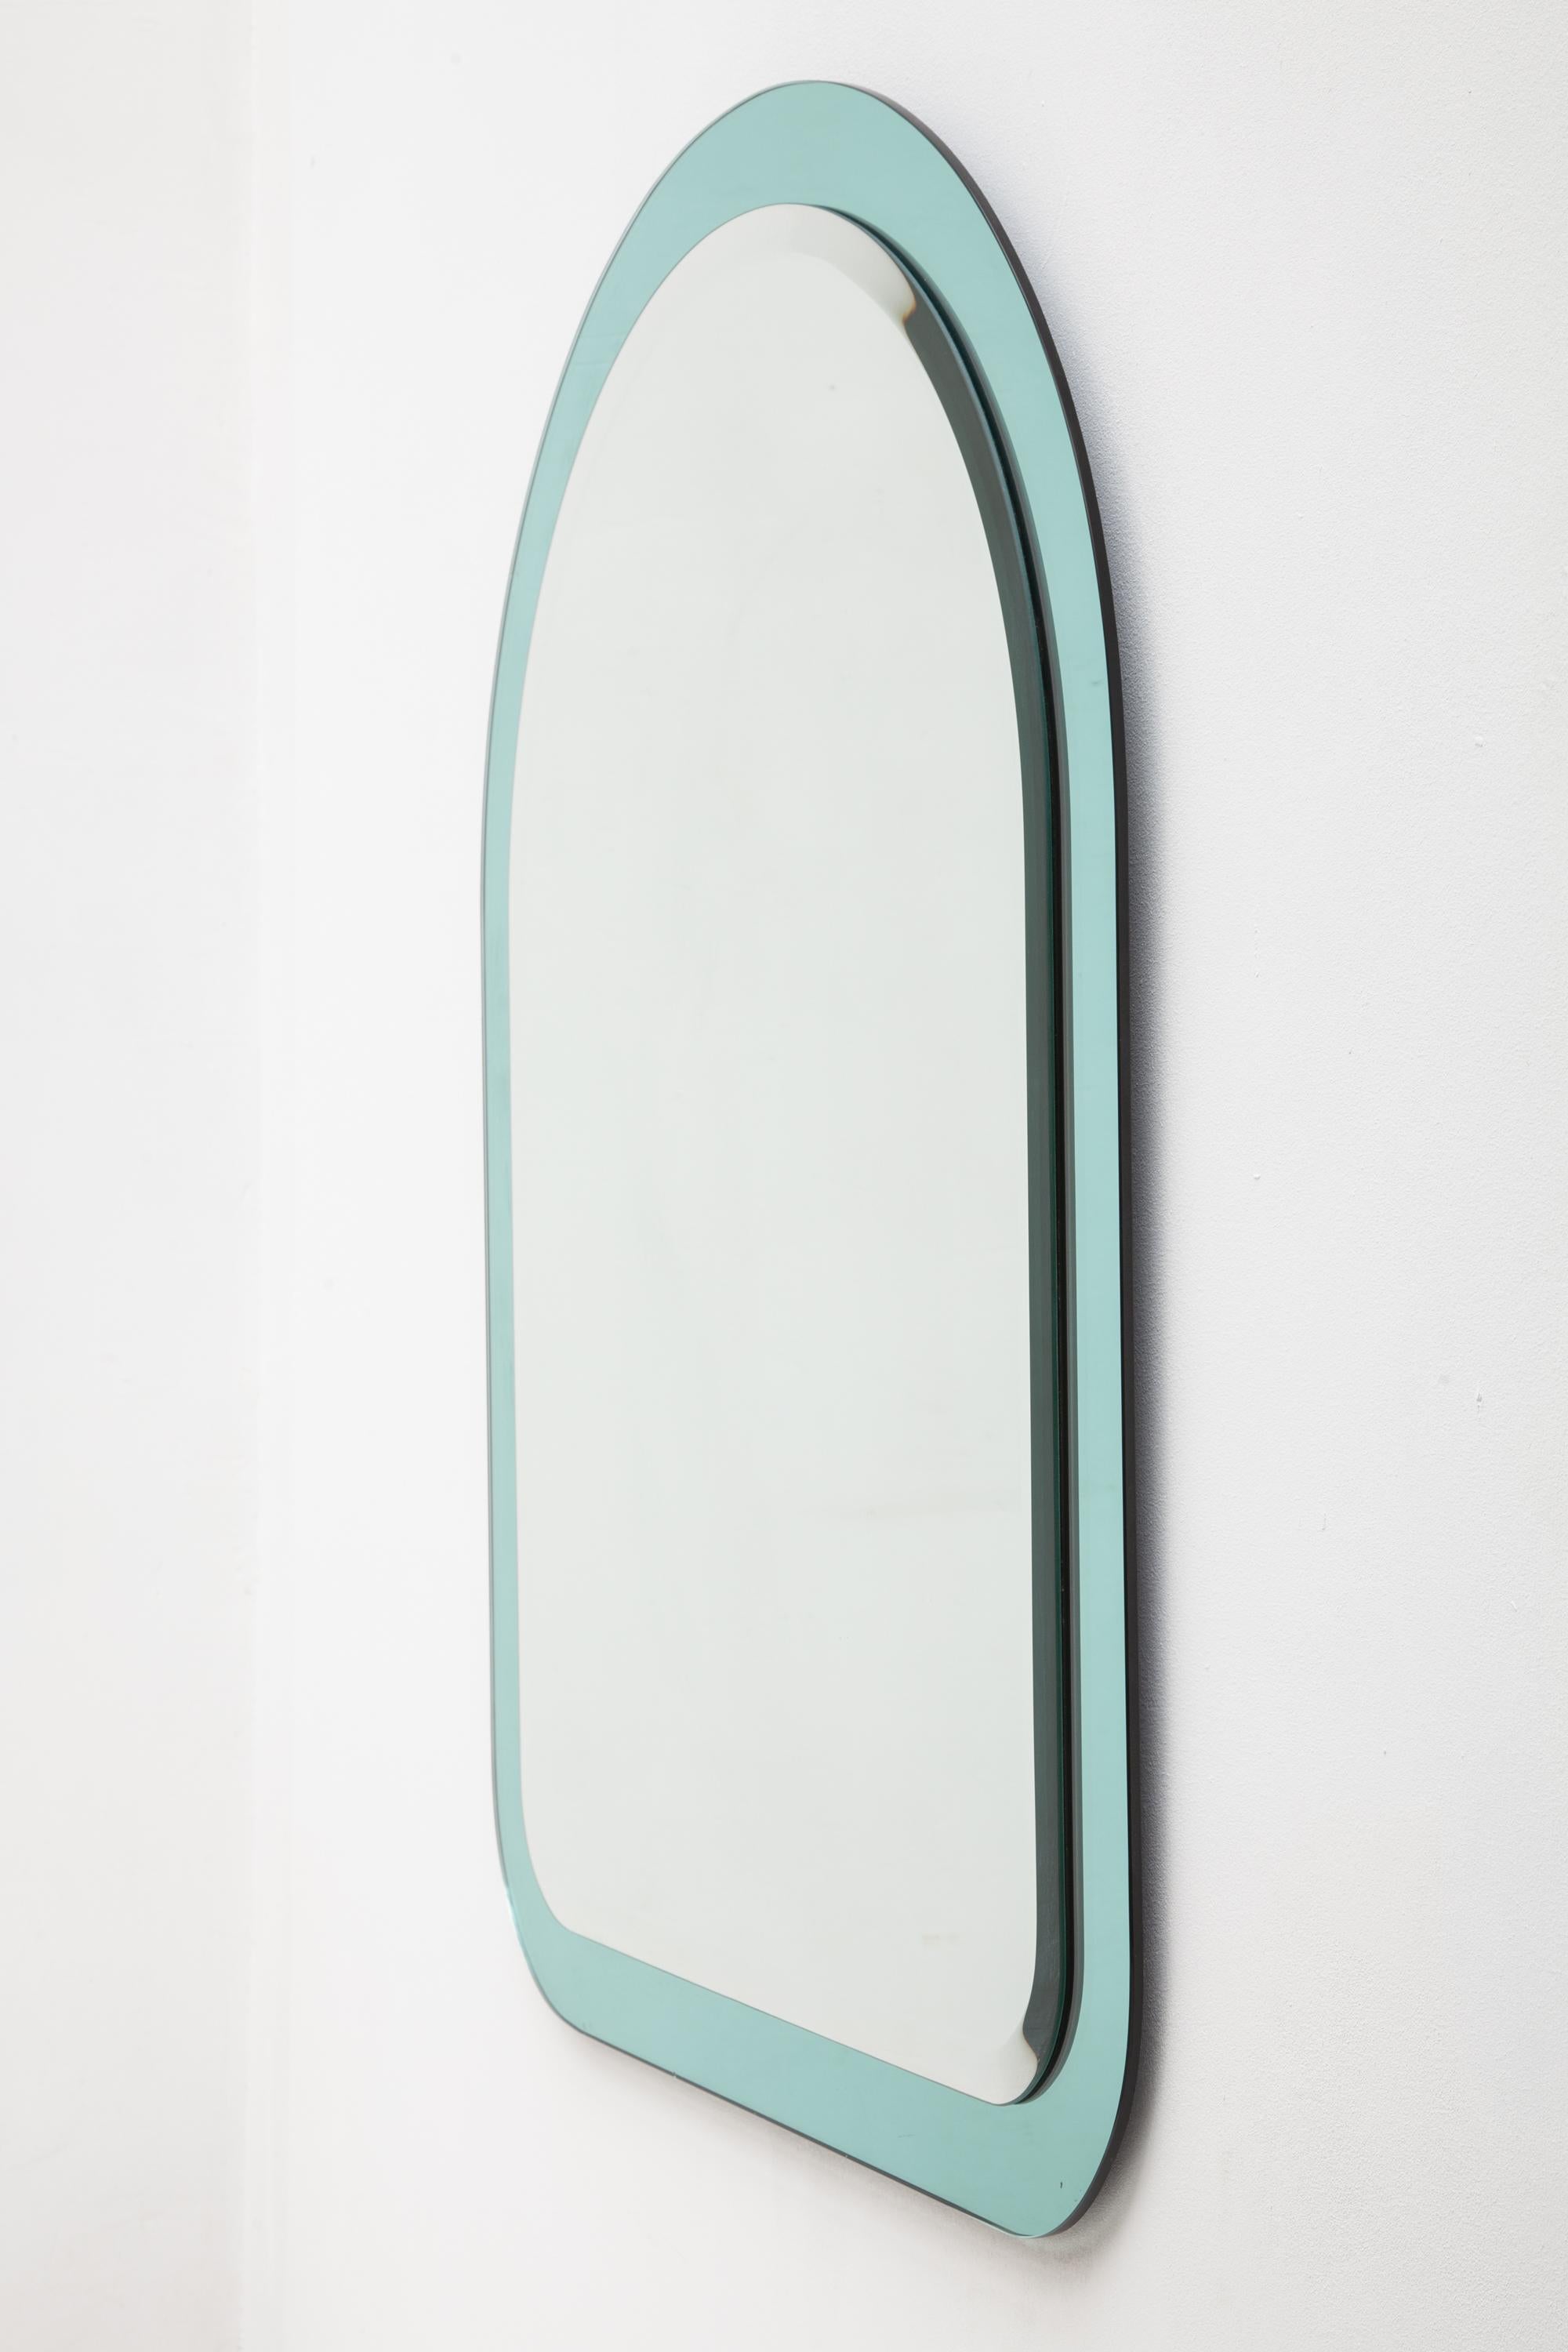 Vintage 1970s mirror designed by Cristal Art in a sleek arch shape features a clear glass mirror mounted on a frame of aqua blue mirrored glass.
Mint condition.